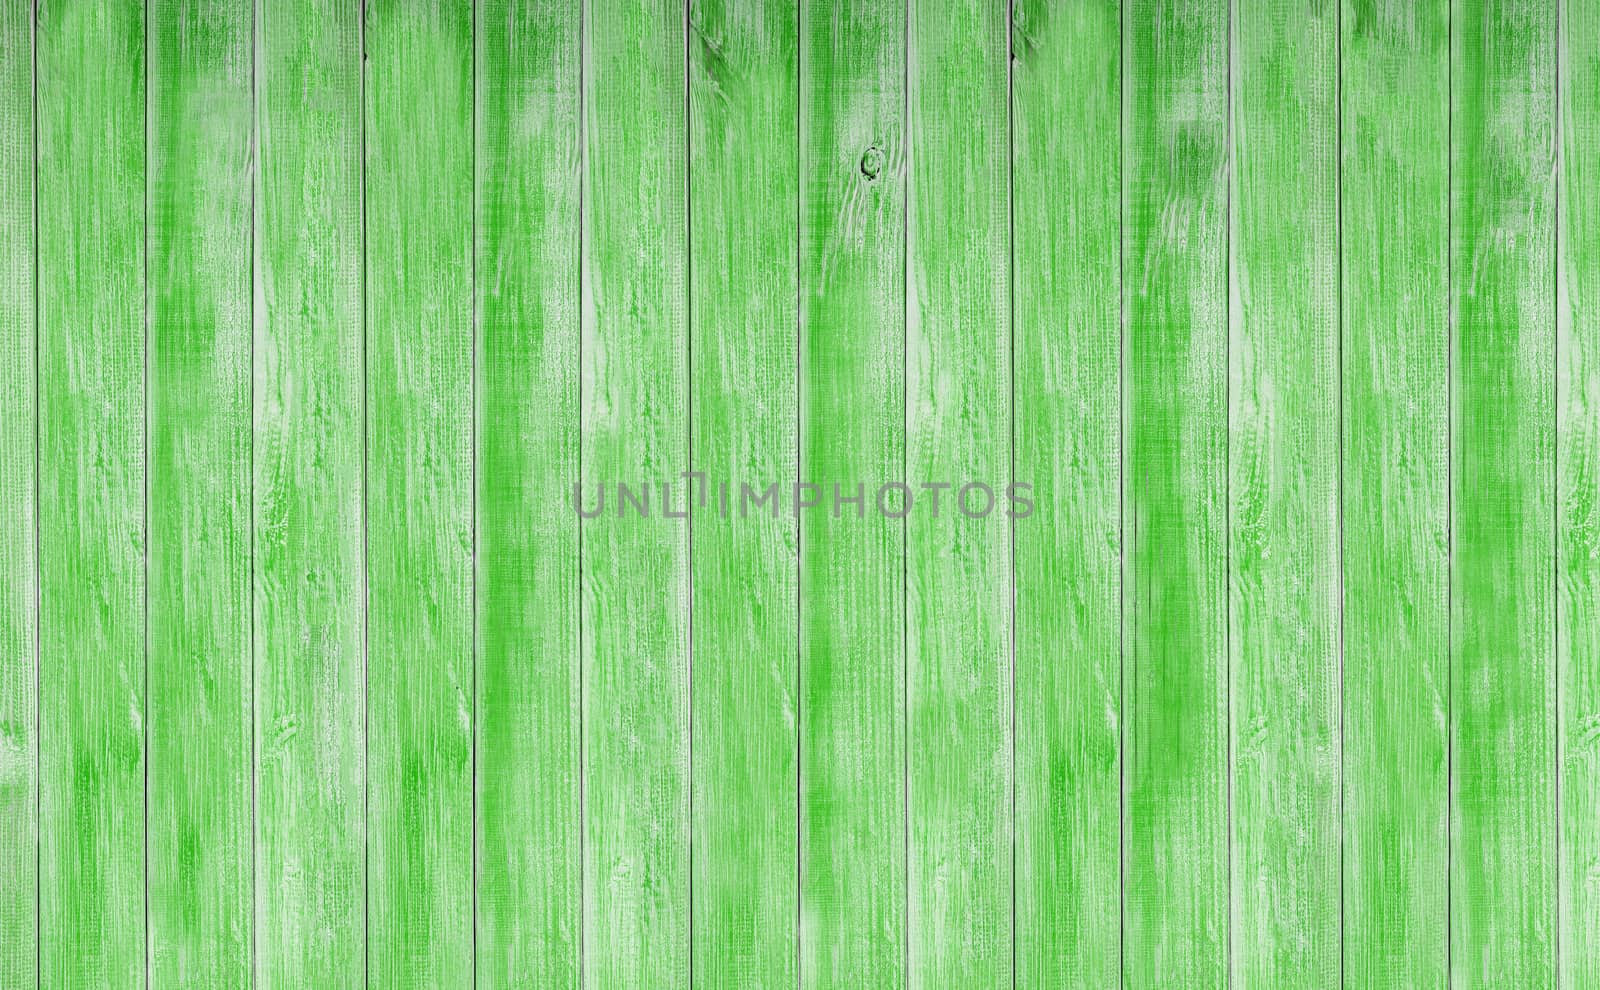 Pale green wood plank surface texture, wooden board copy space